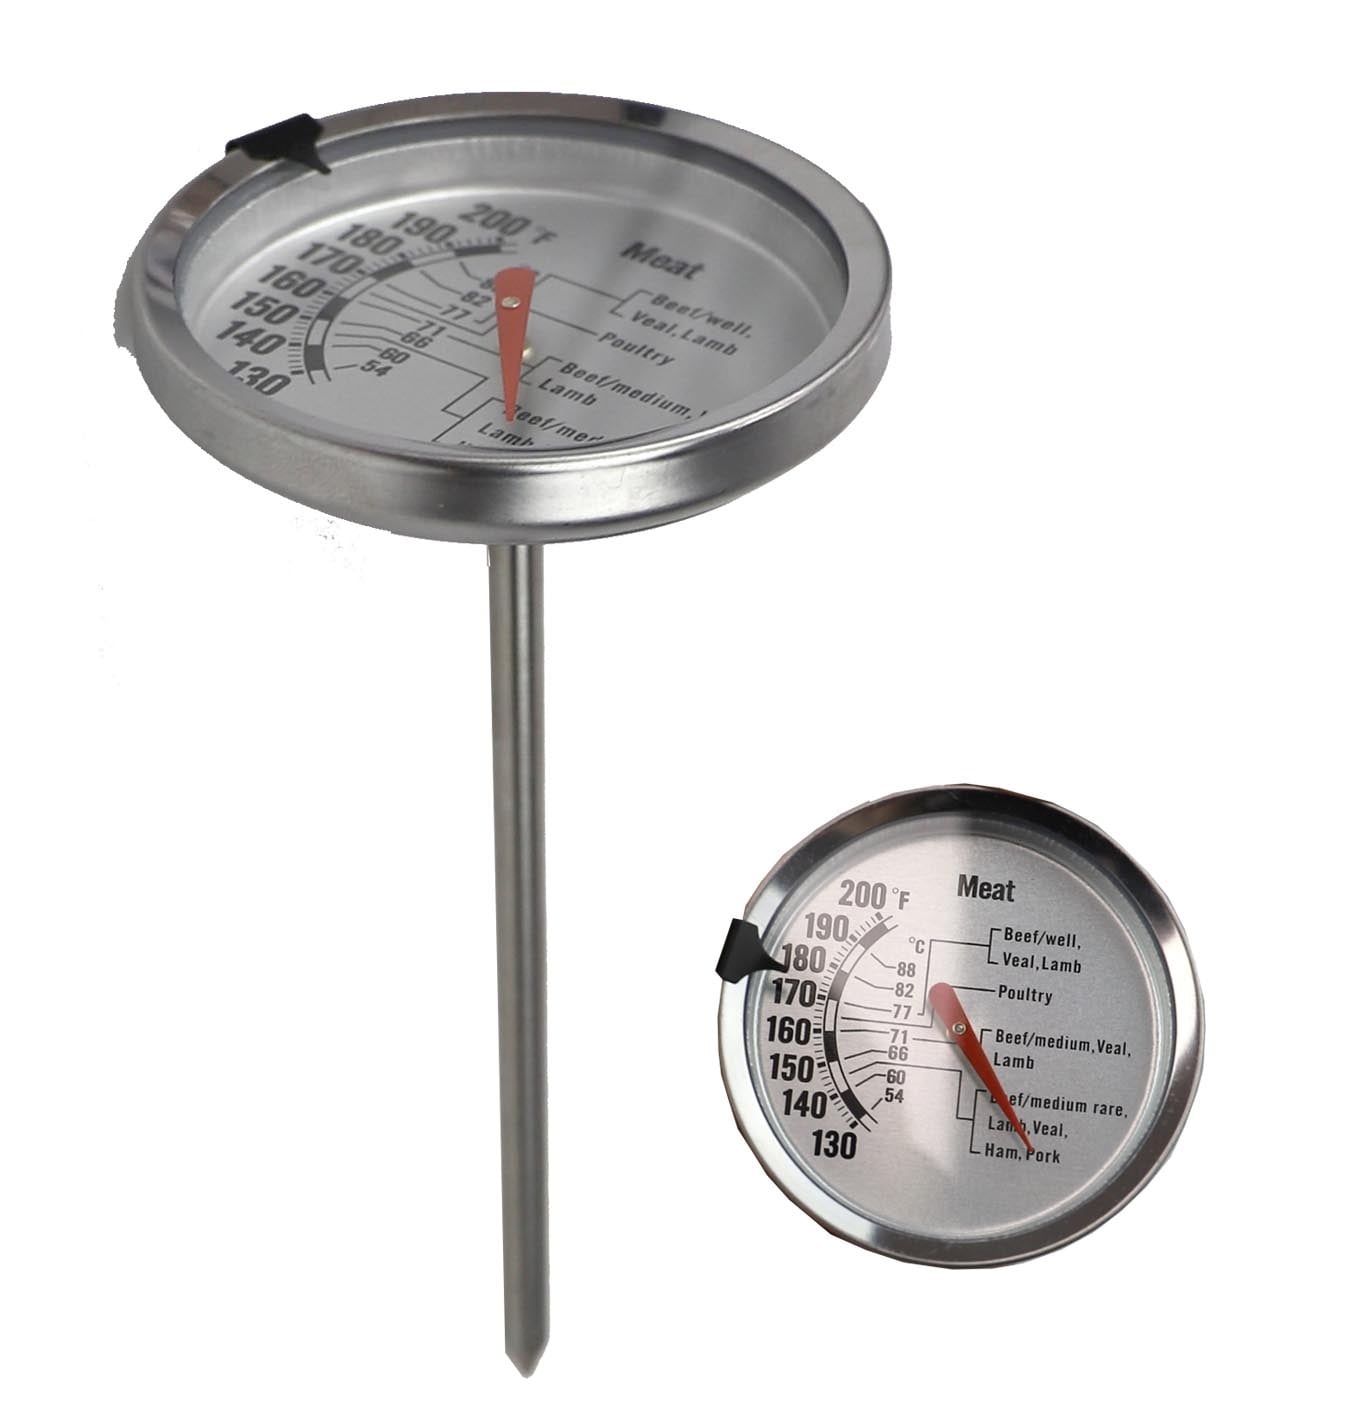 . 0 1 Count - Stainless Steel/Black Large 2.5 Inch Dial Kitchen Cooking Oven Thermometer